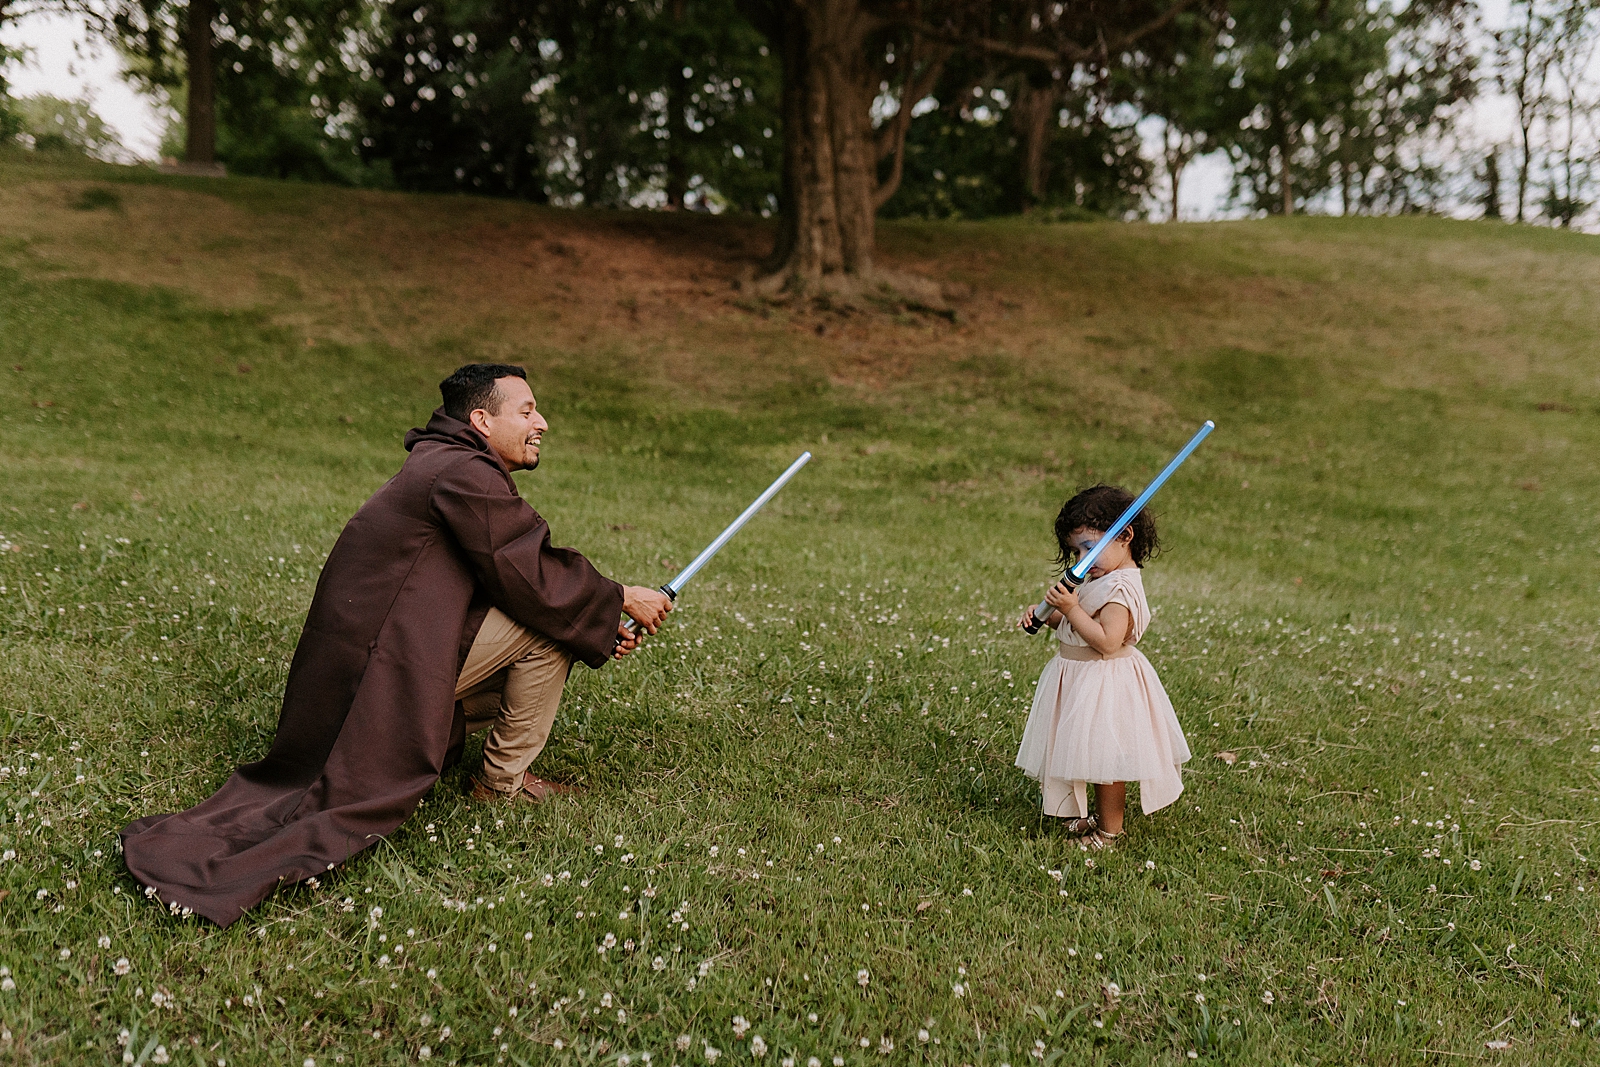 Father and daughter holding lightsabers on grassy field playing